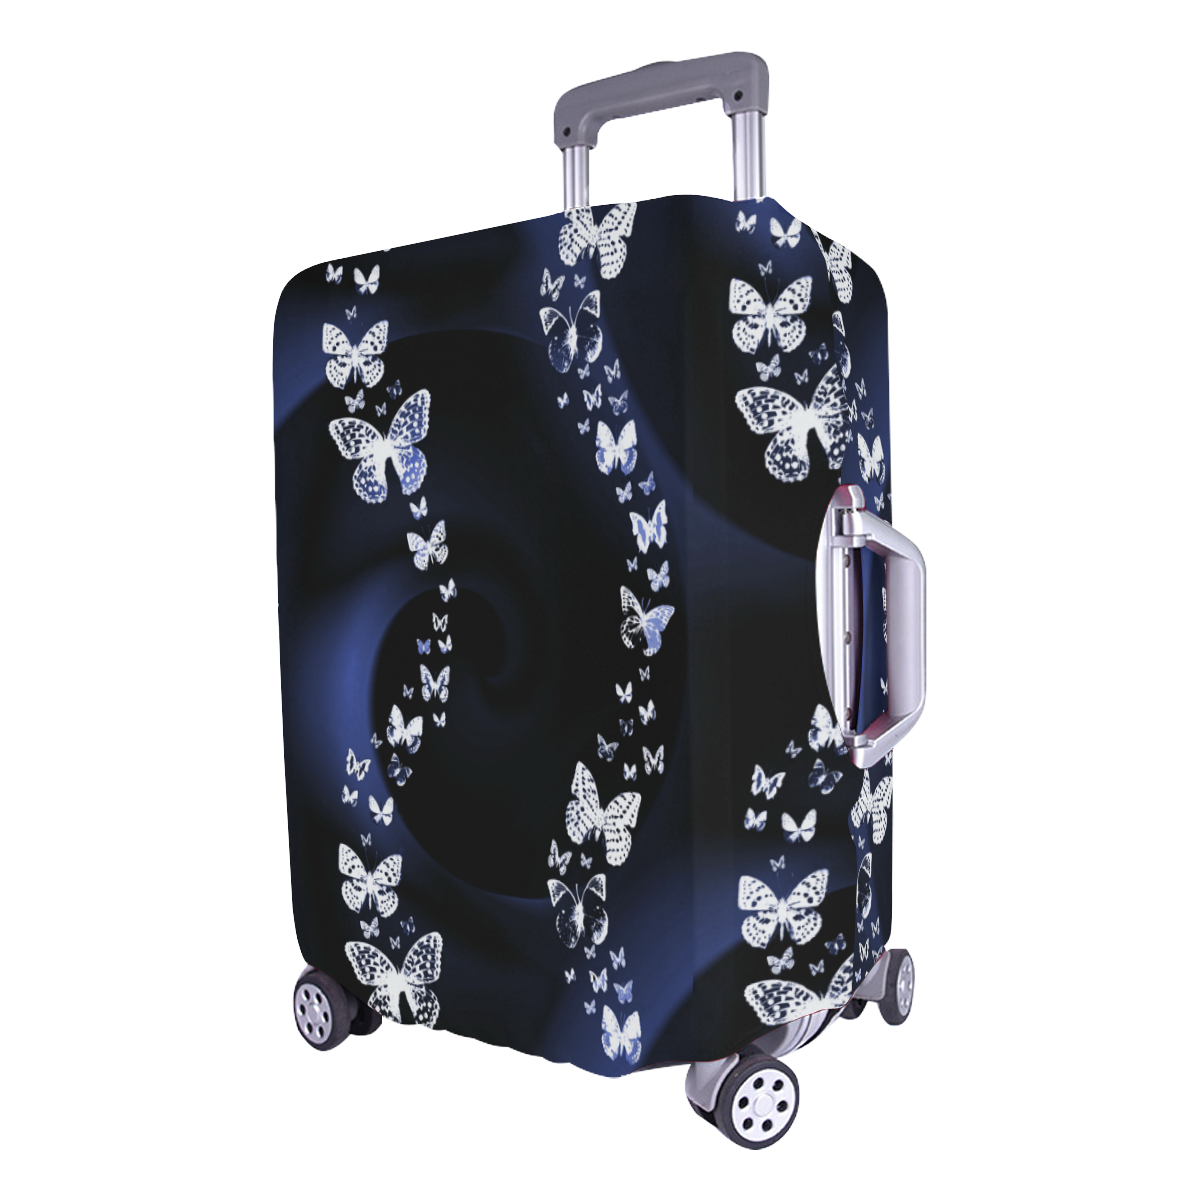 Blue Butterfly Swirl Luggage Cover/Large 26"-28"